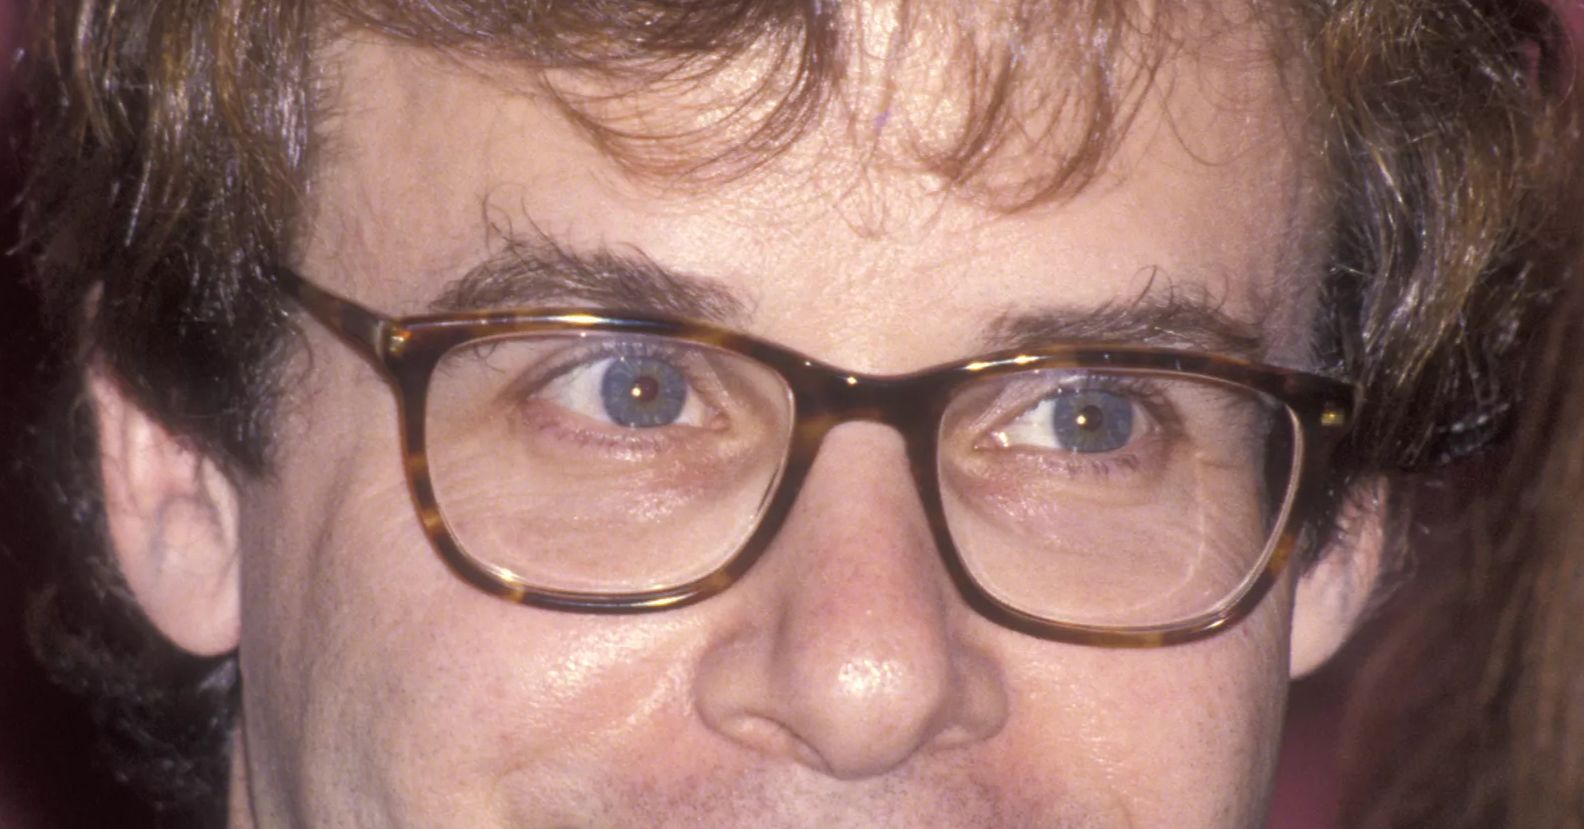 Rick Moranis Offically Signed on To Star In 'Honey I Shrunk The Kids' Reboot